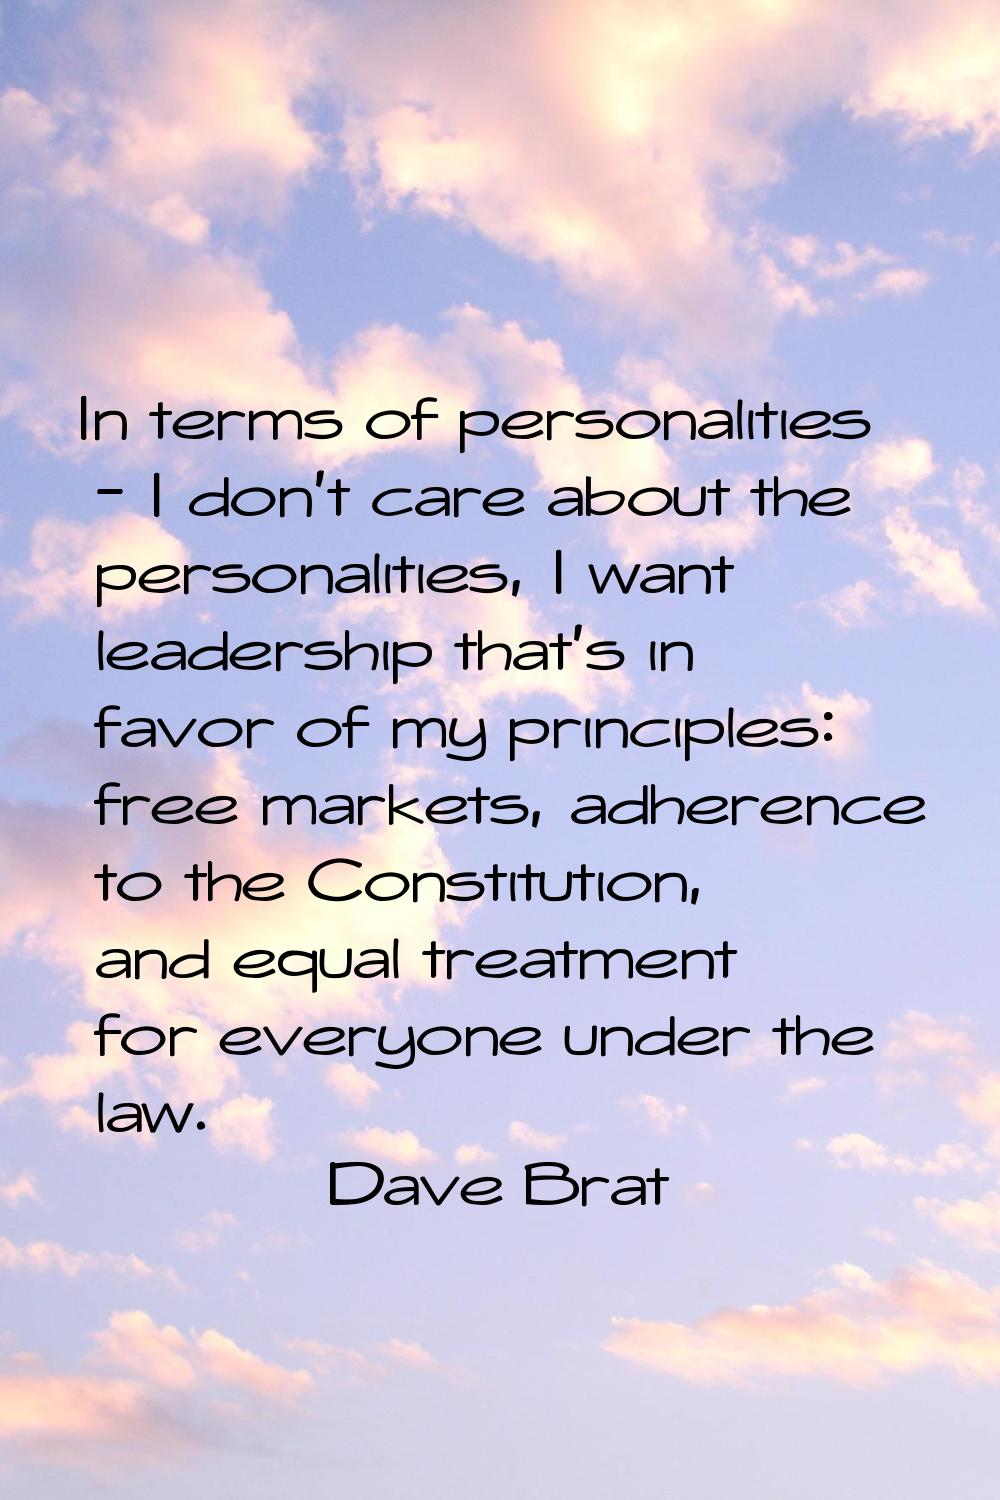 In terms of personalities - I don't care about the personalities, I want leadership that's in favor